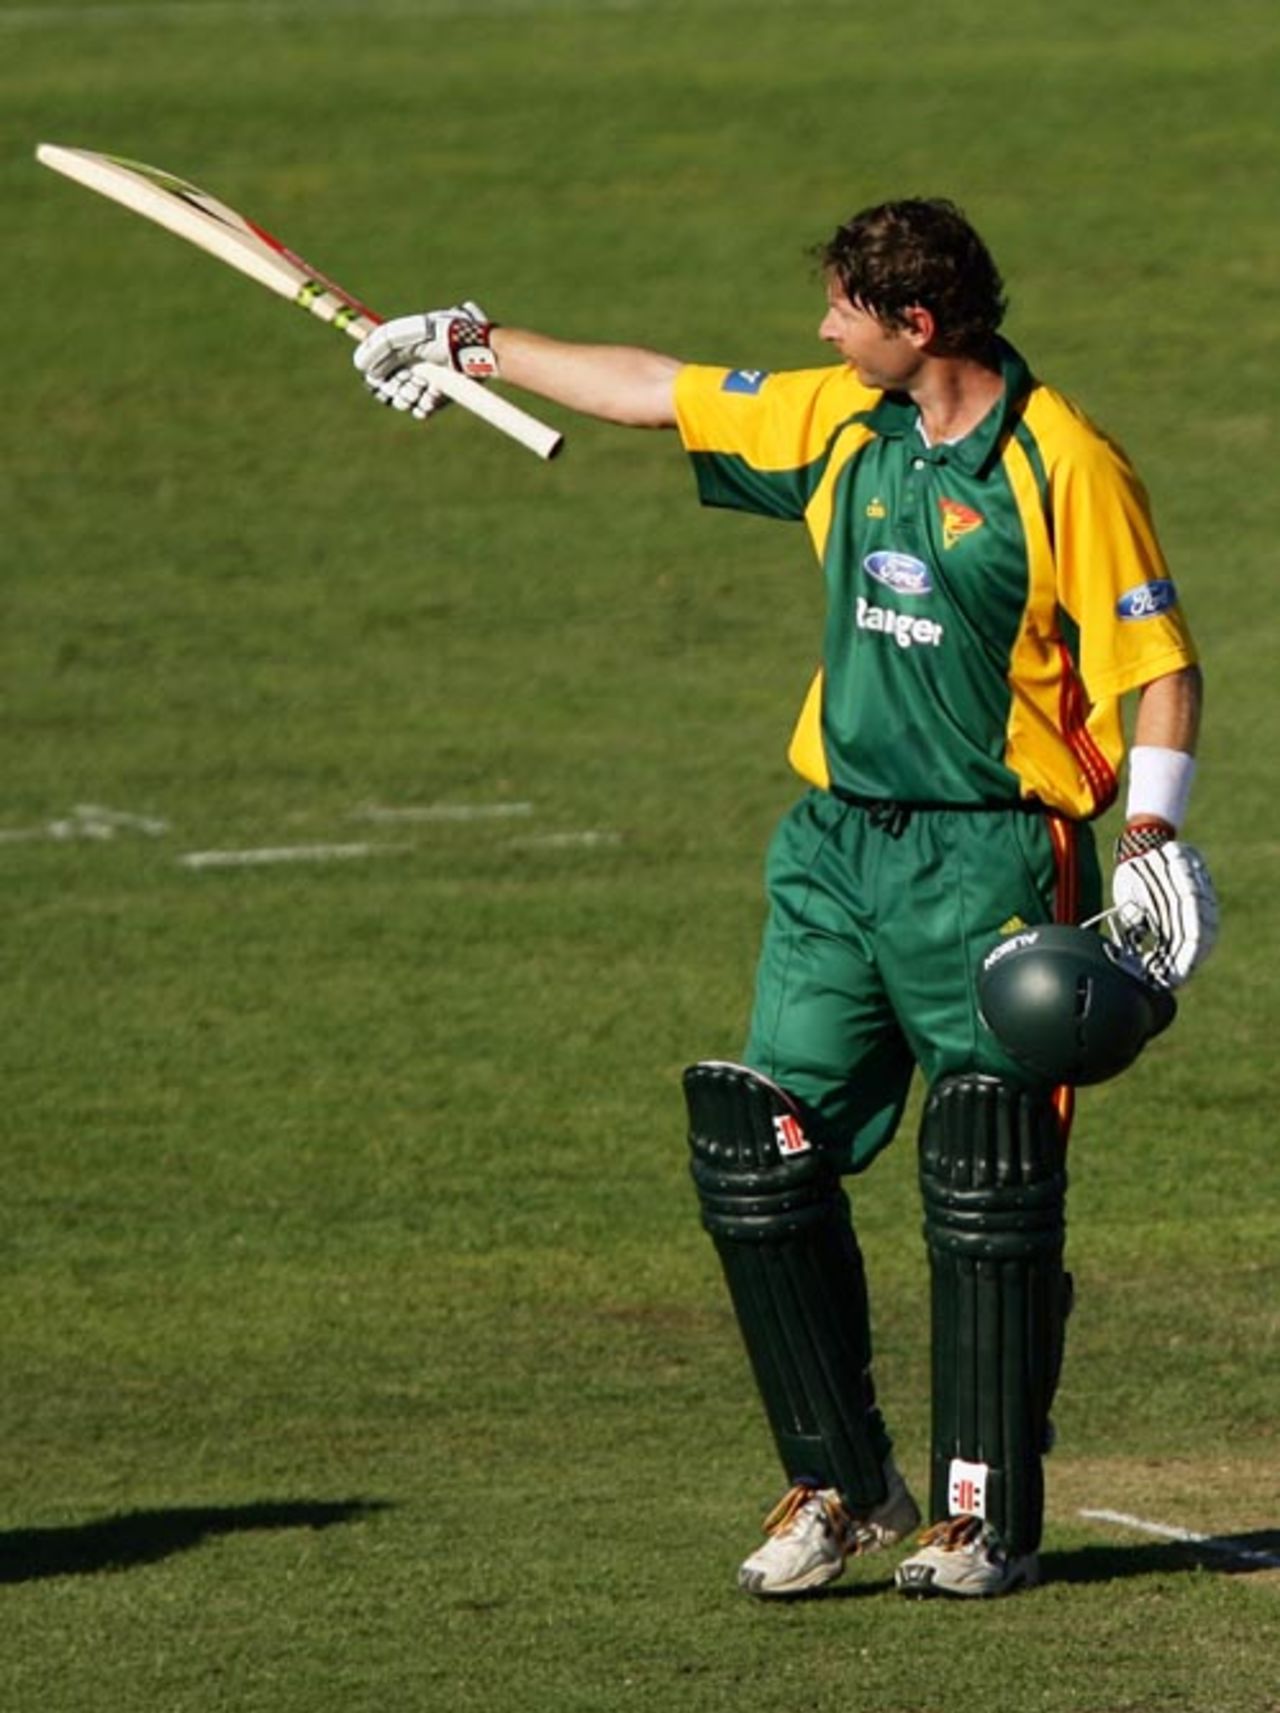 Michael Dighton scored an unbeaten 146 in the Tigers' comprehensive win, New South Wales v Tasmania, FR Cup, Sydney, November 25, 2007